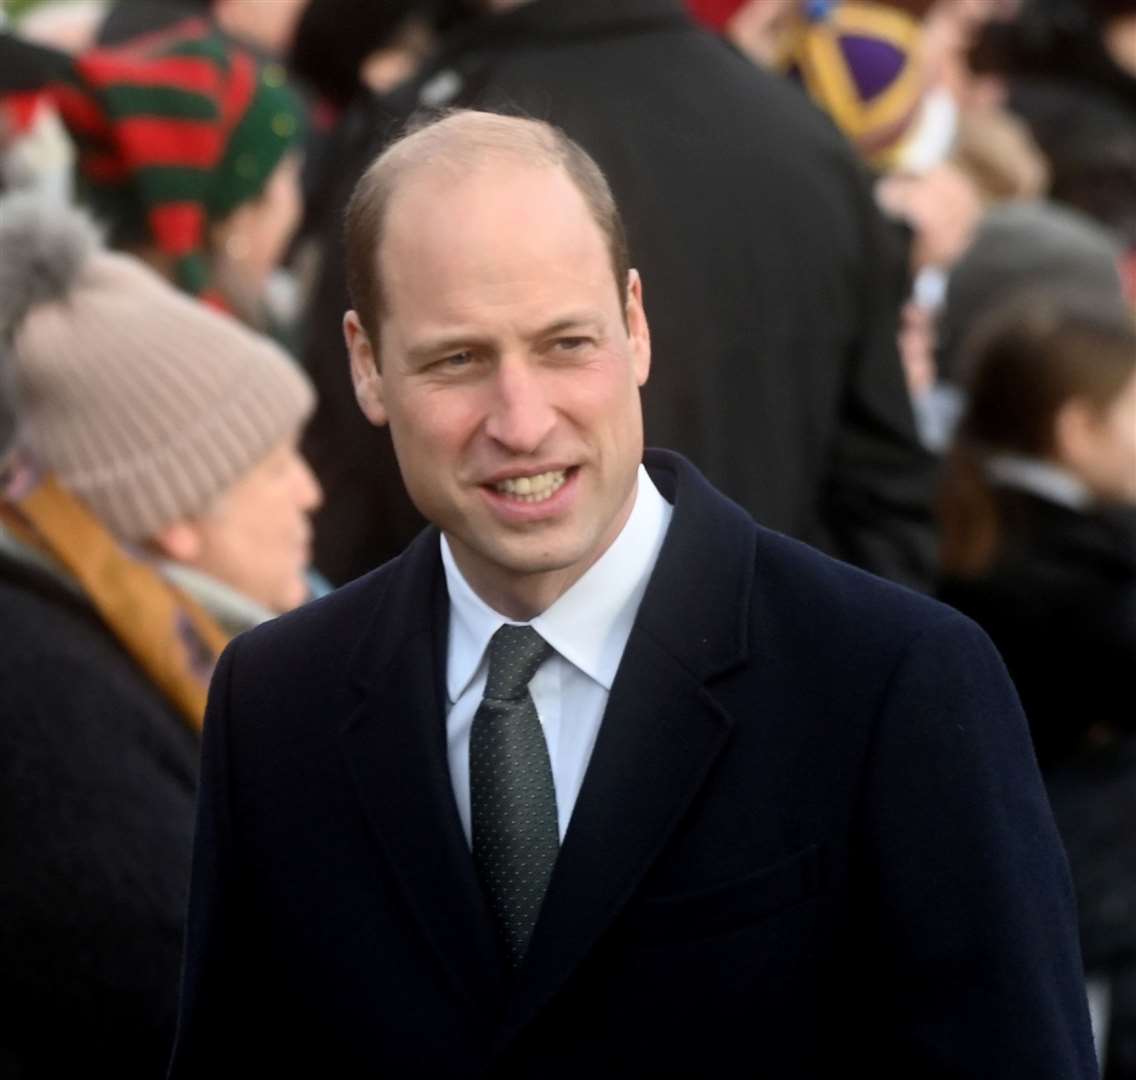 Prince William at Sandringham for the traditional Christmas Day Service